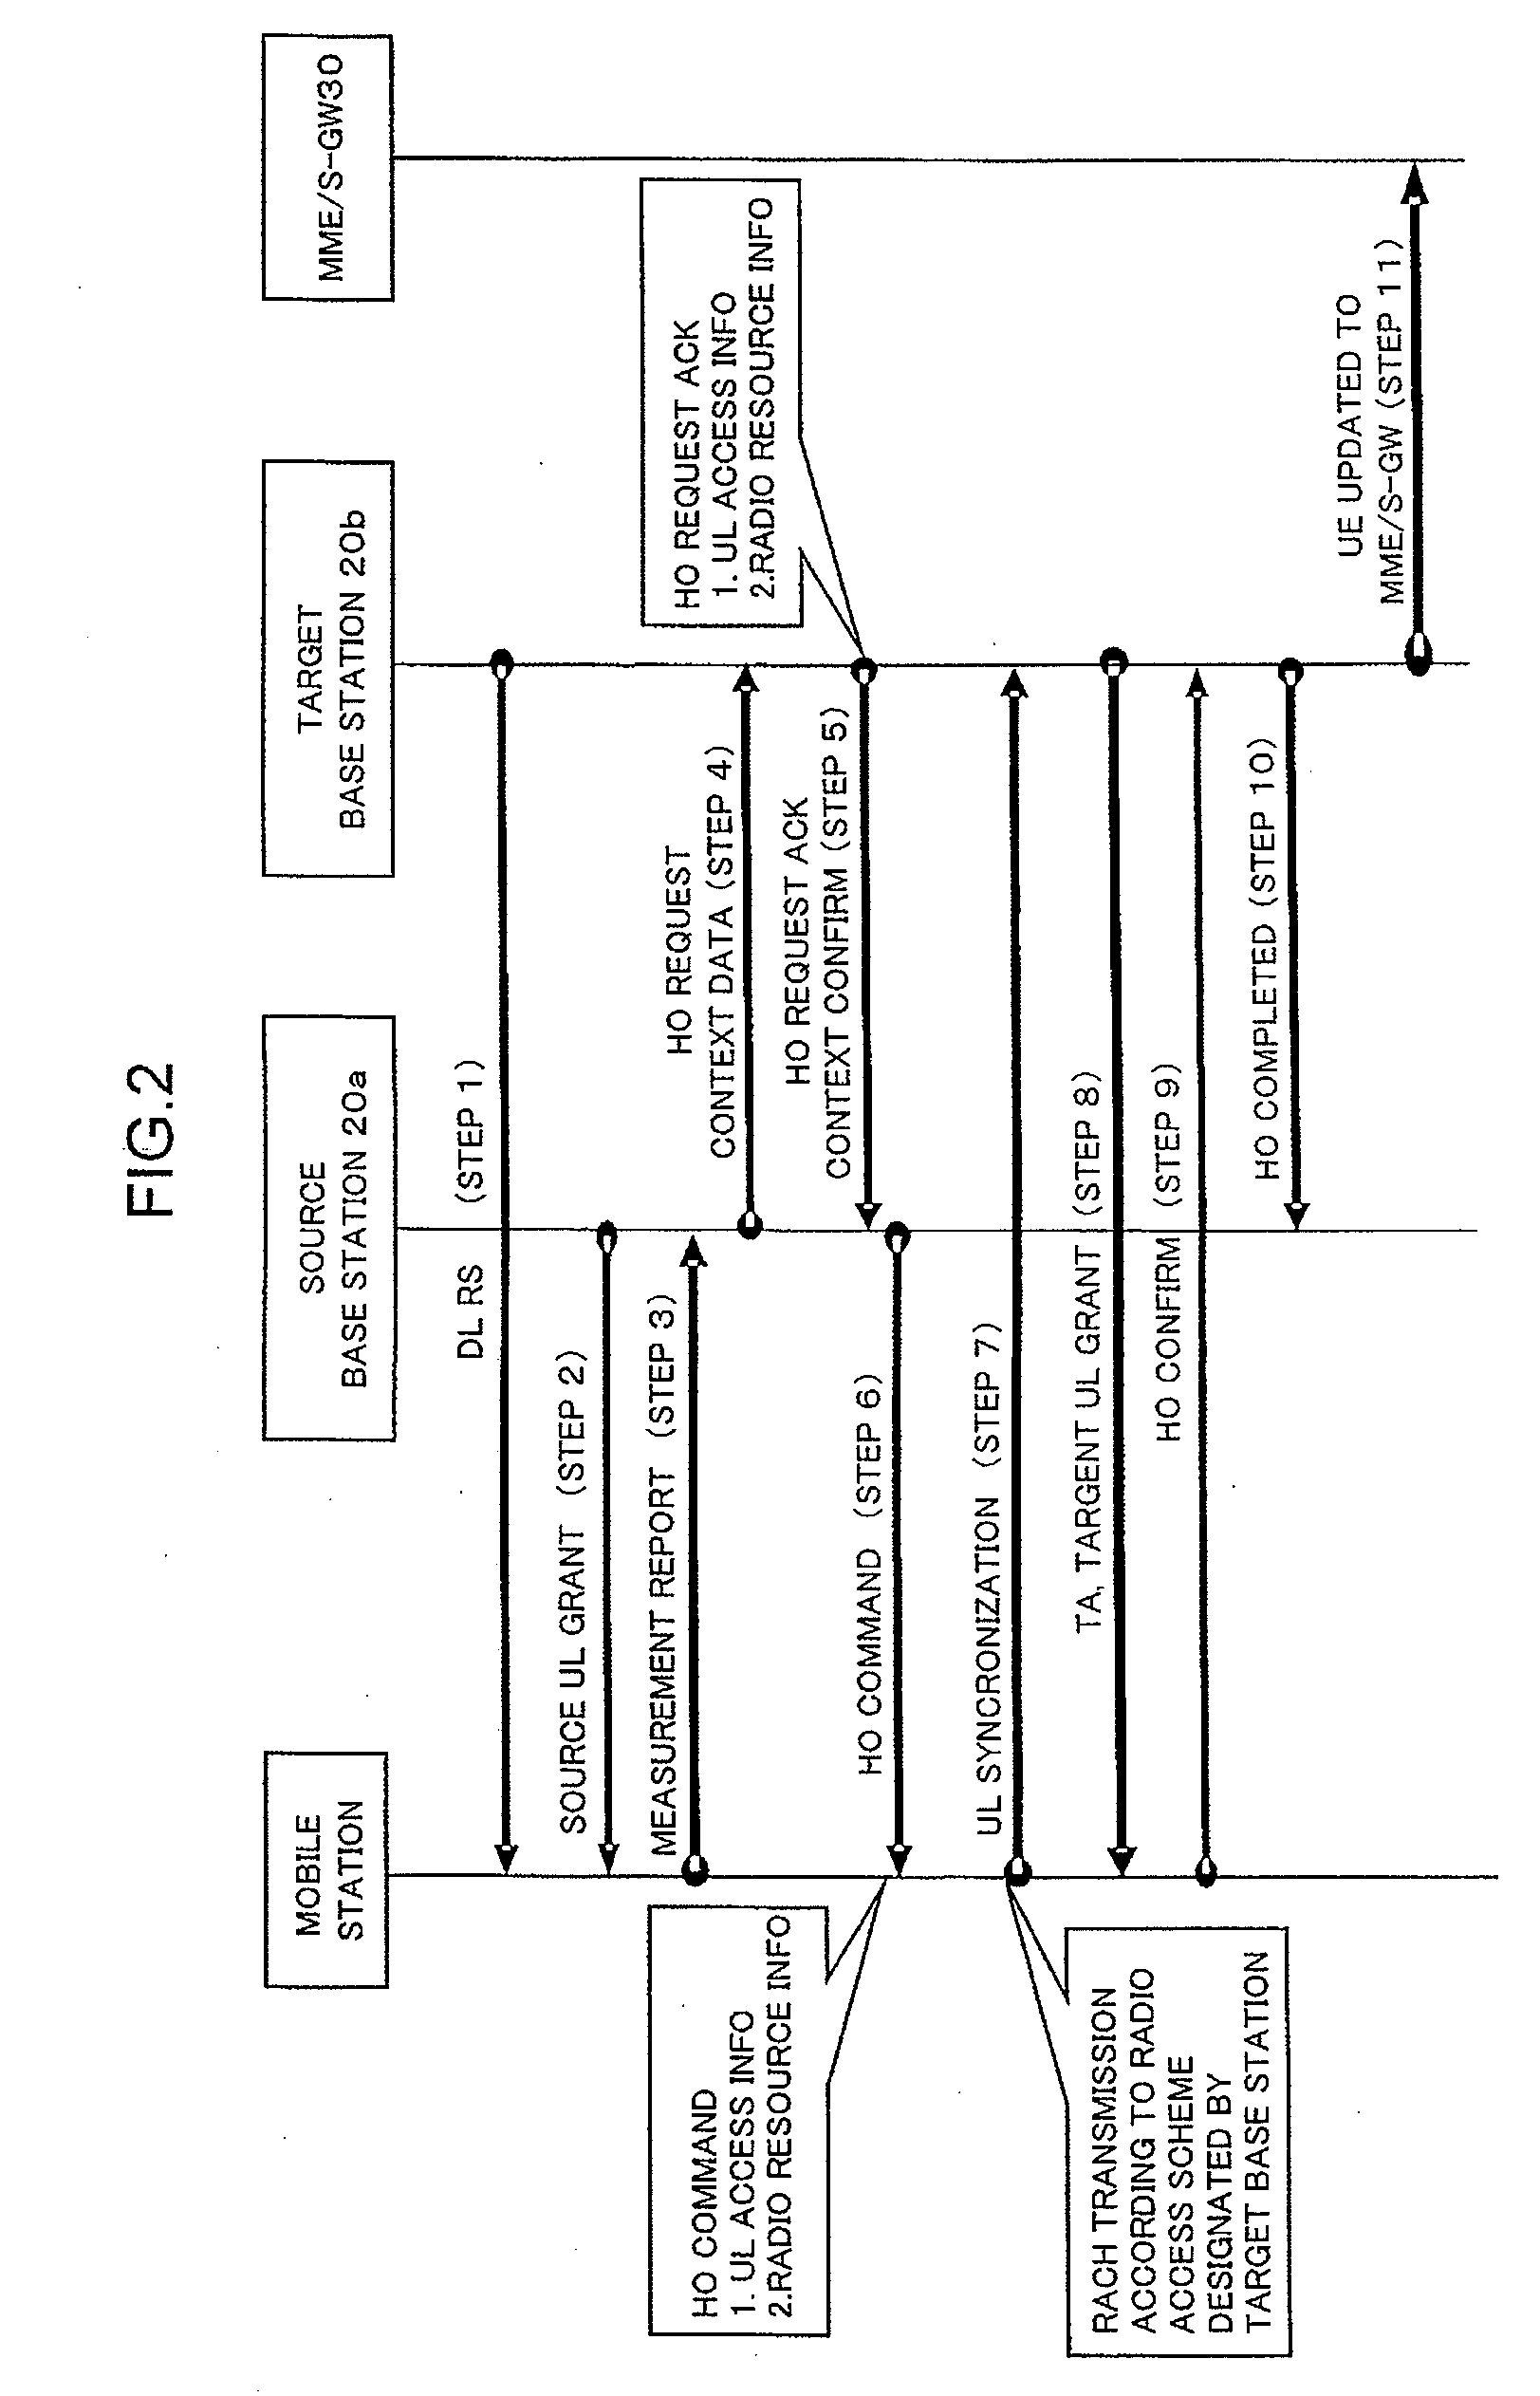 Method for handover between different radio access schemes and wireless communication system